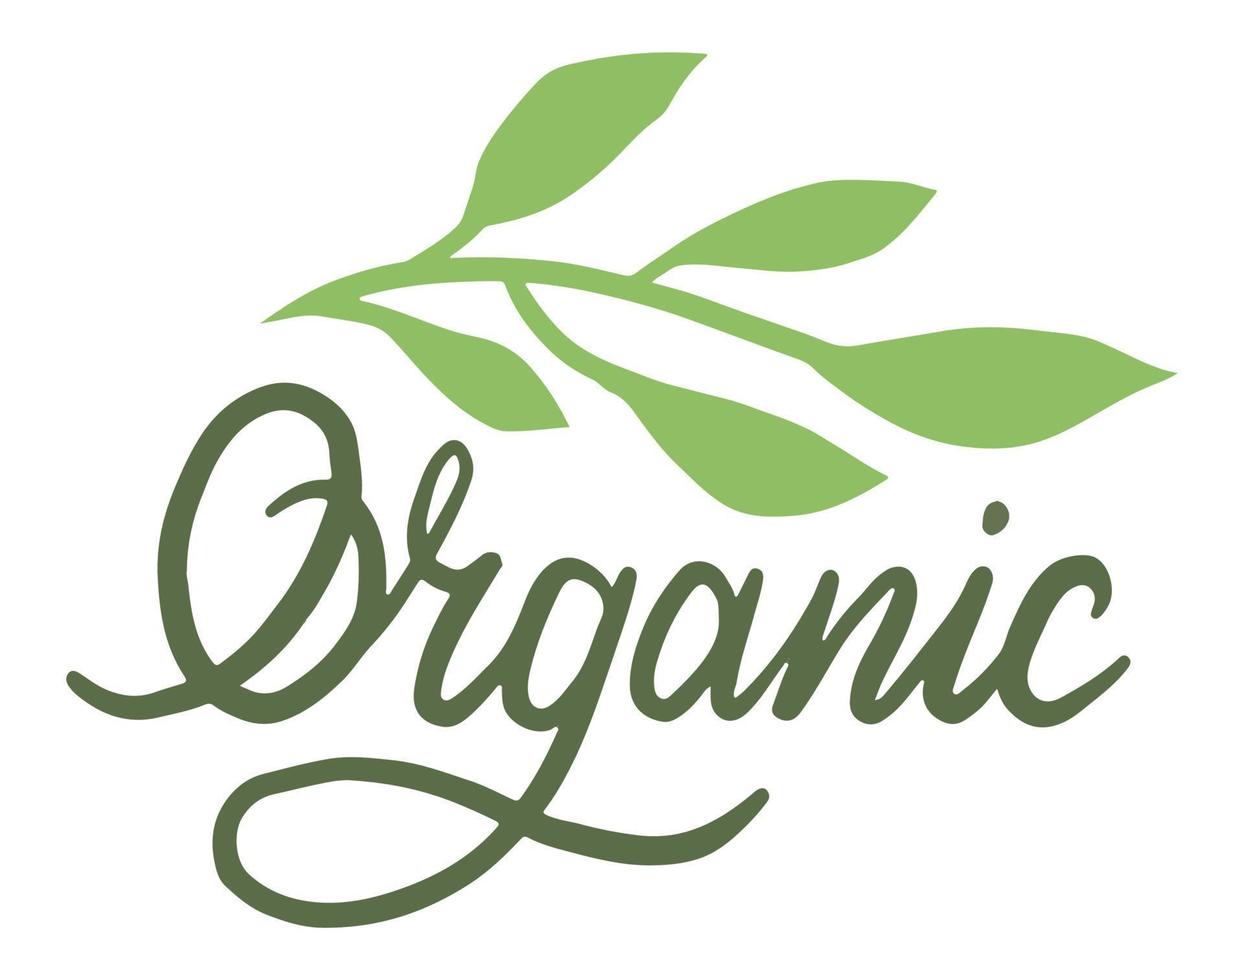 Organic and natural production and goods vector